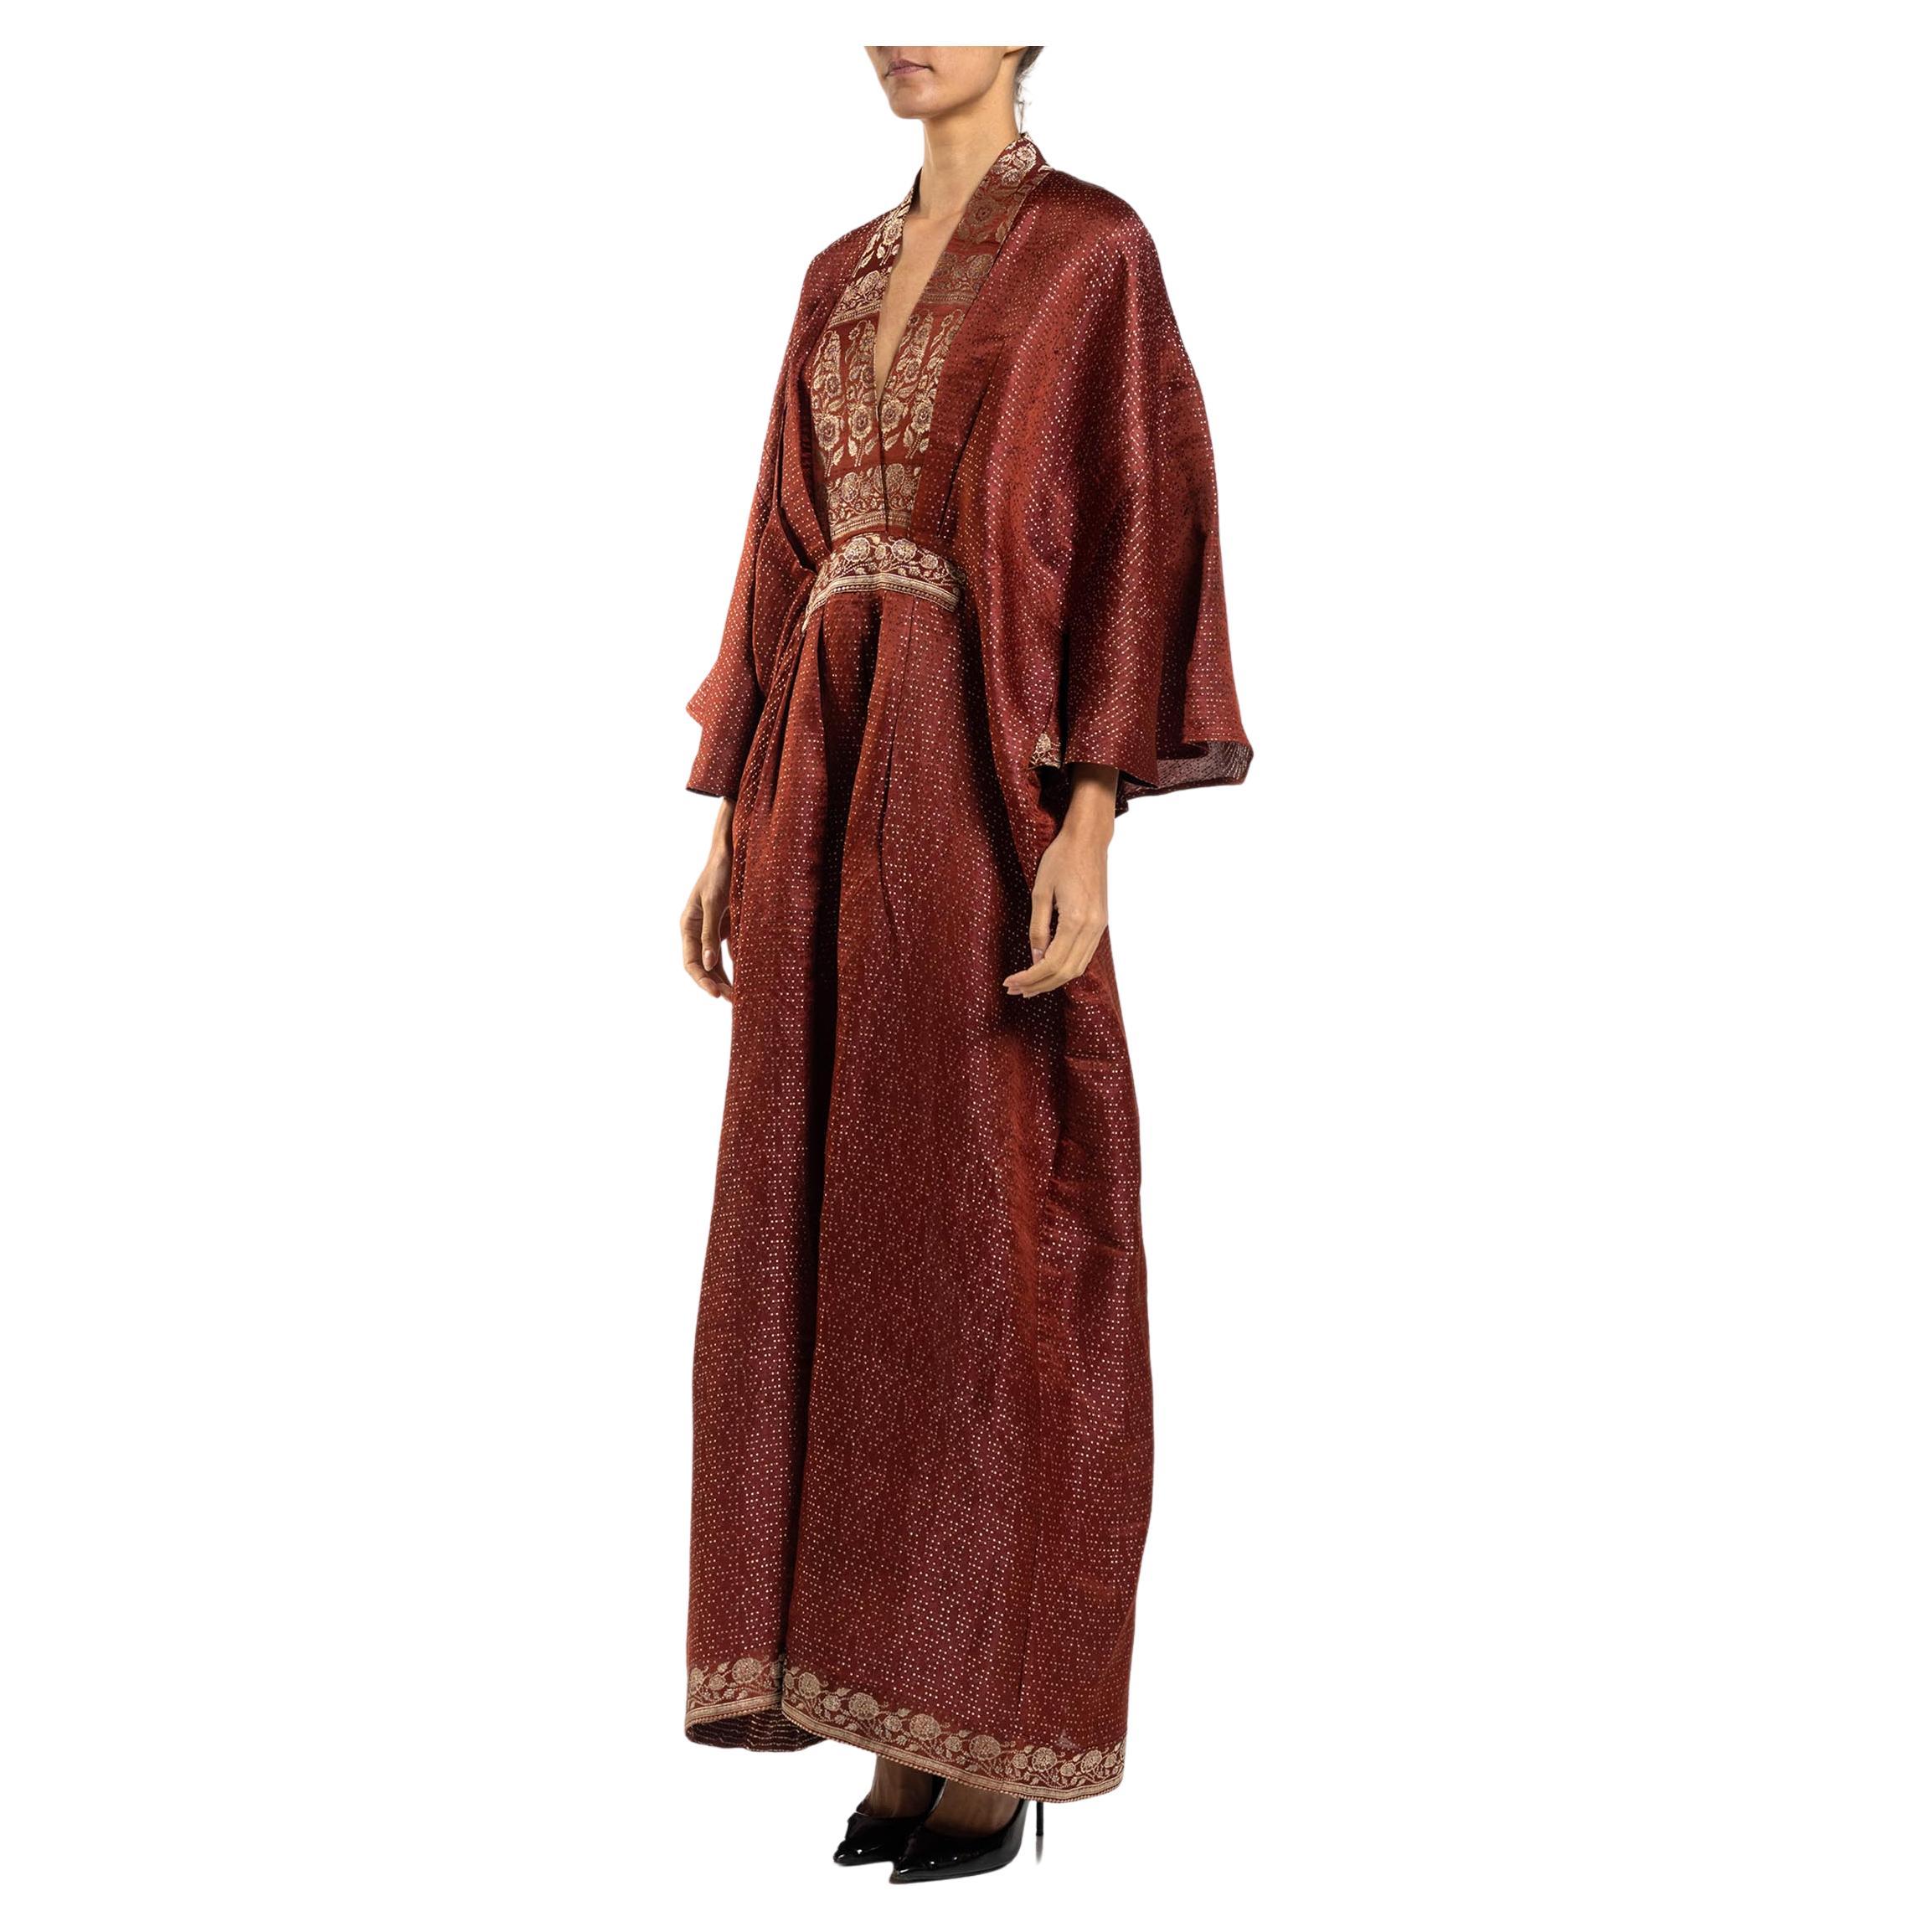 MORPHEW COLLECTION Burgundy Floral Silk Checkered Kaftan Made From Vintage Sari For Sale